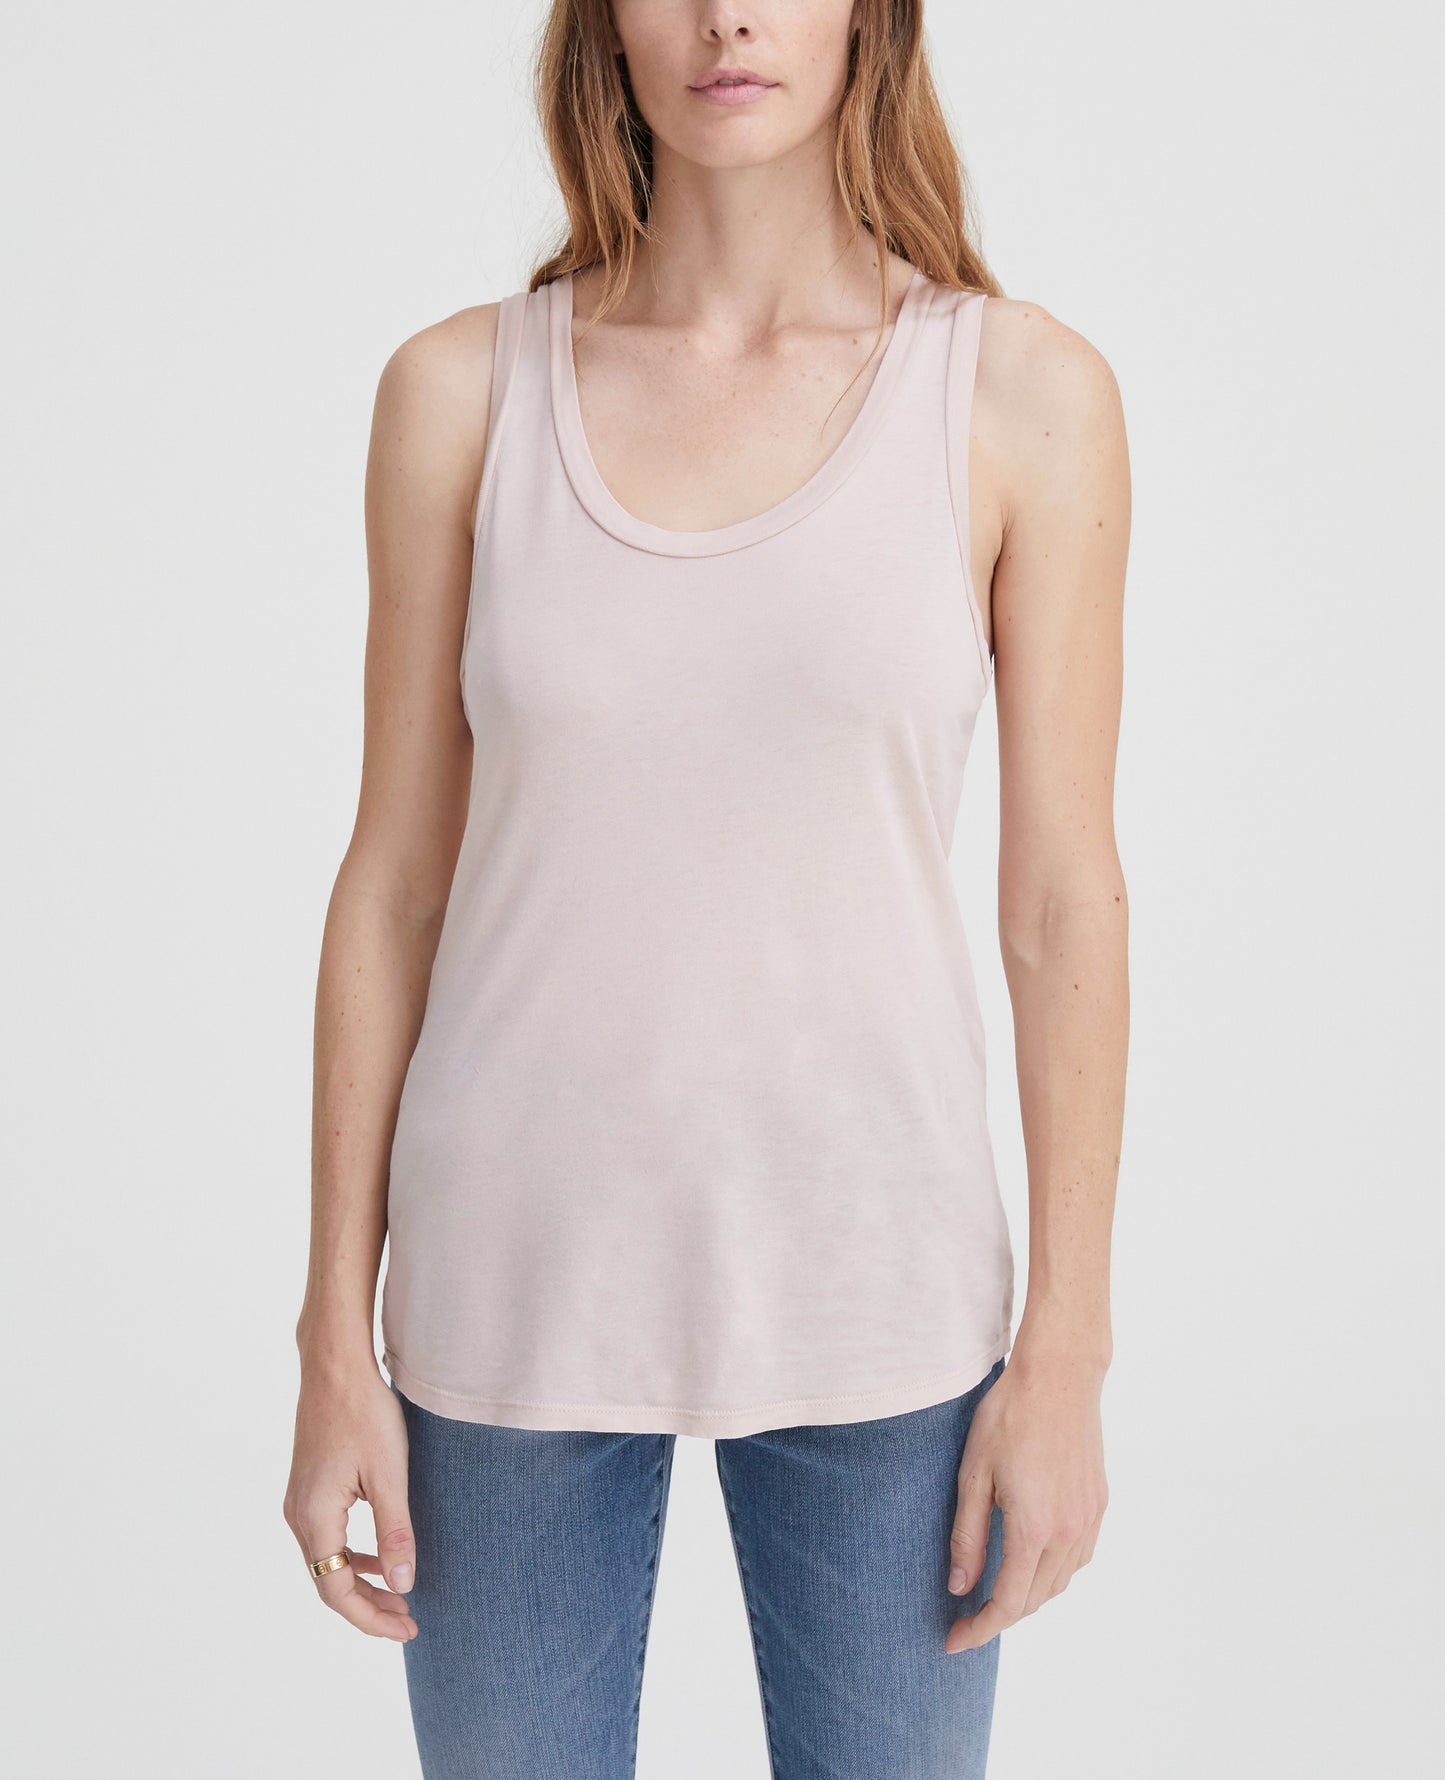 Cambria Tank Peaked Pink Classic Scoop Tank Women Tops Photo 3